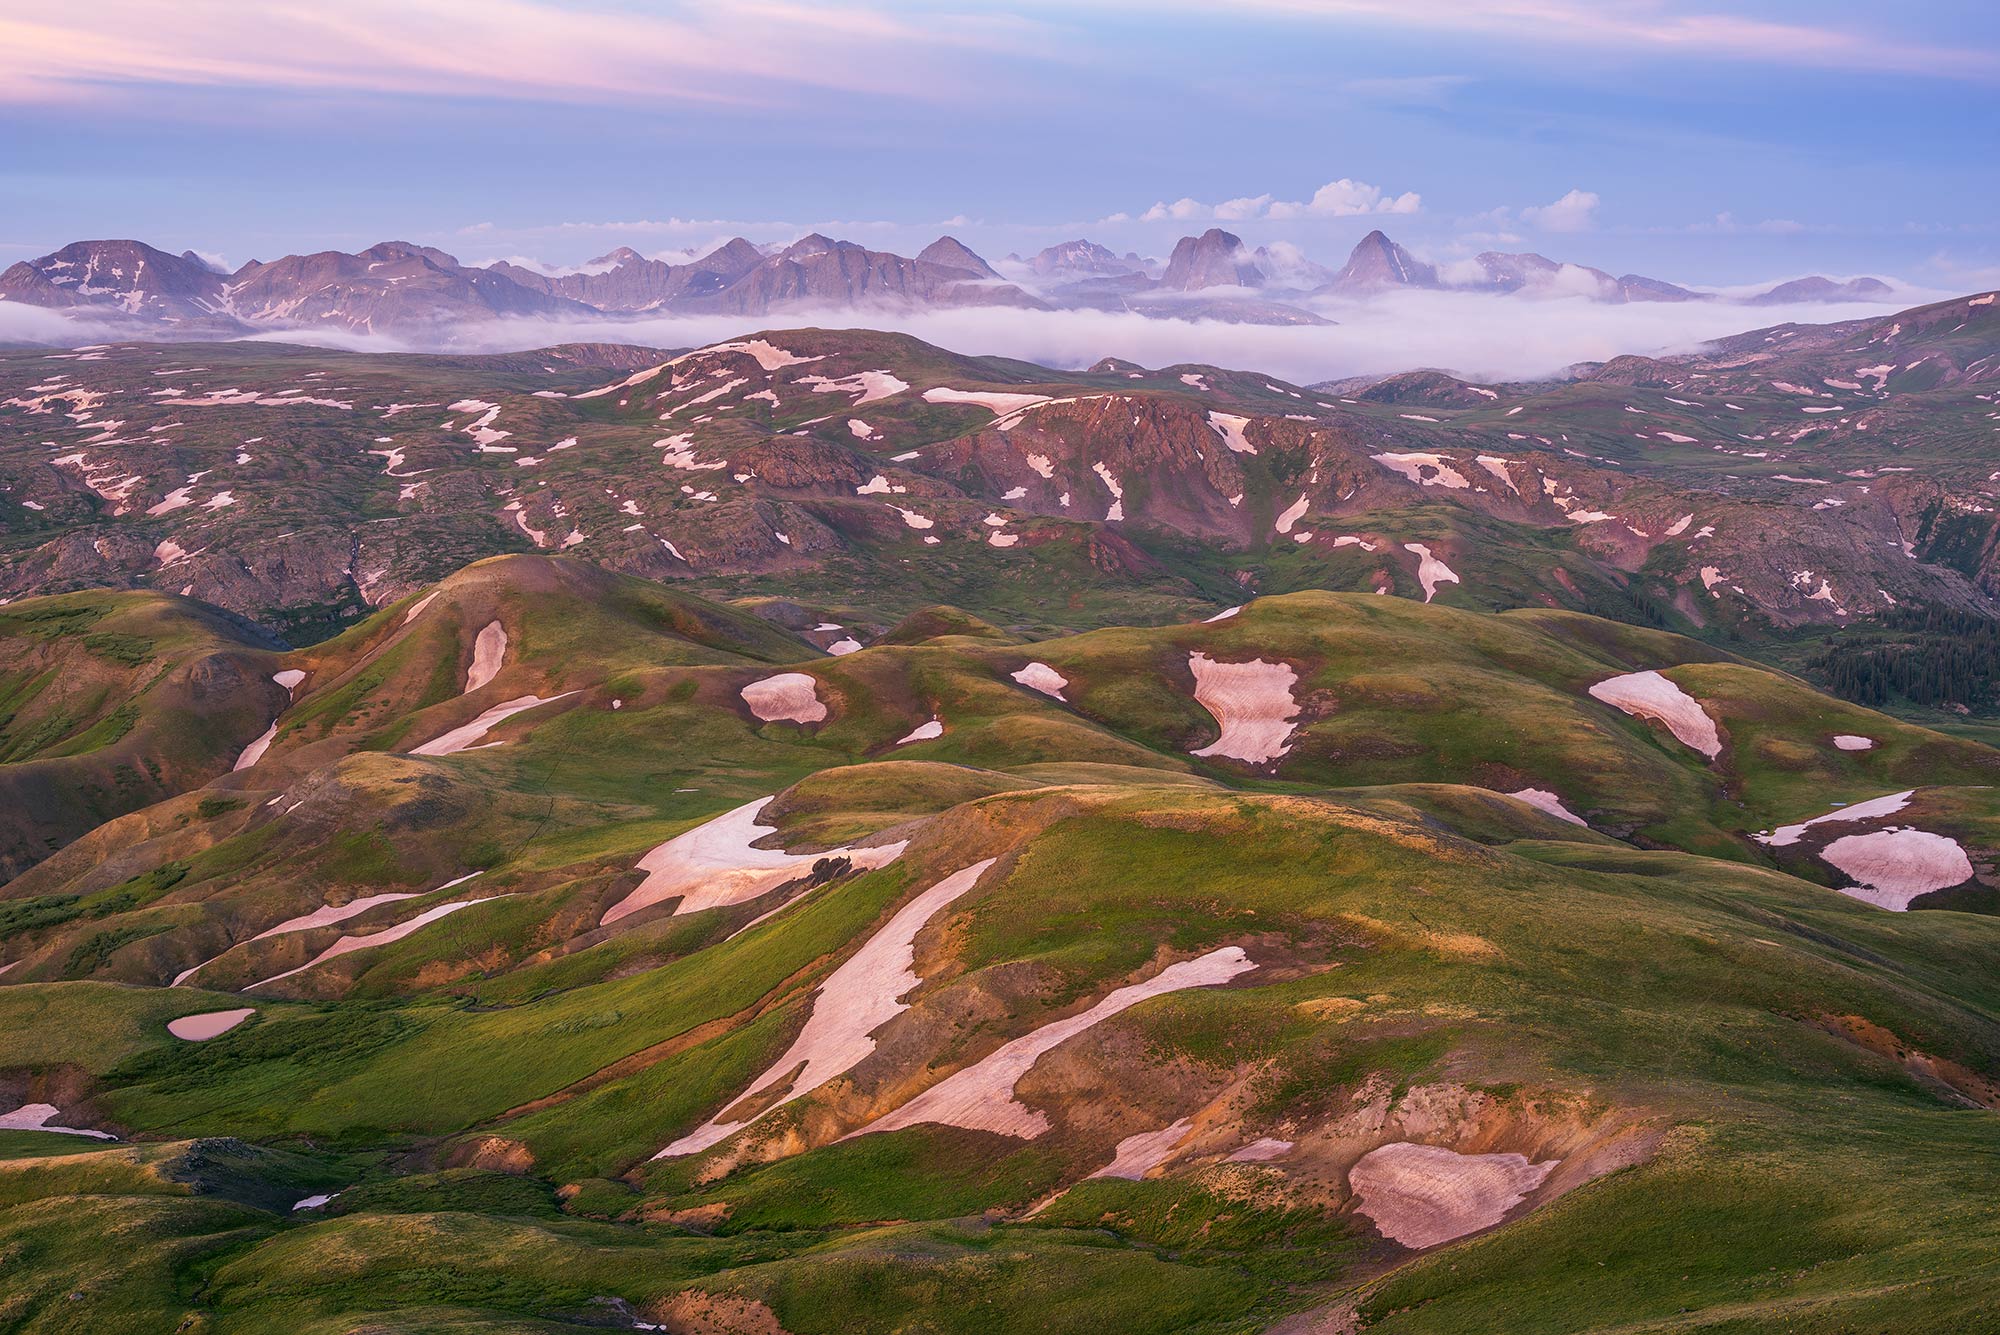 Mountain Photography by Jack Brauer